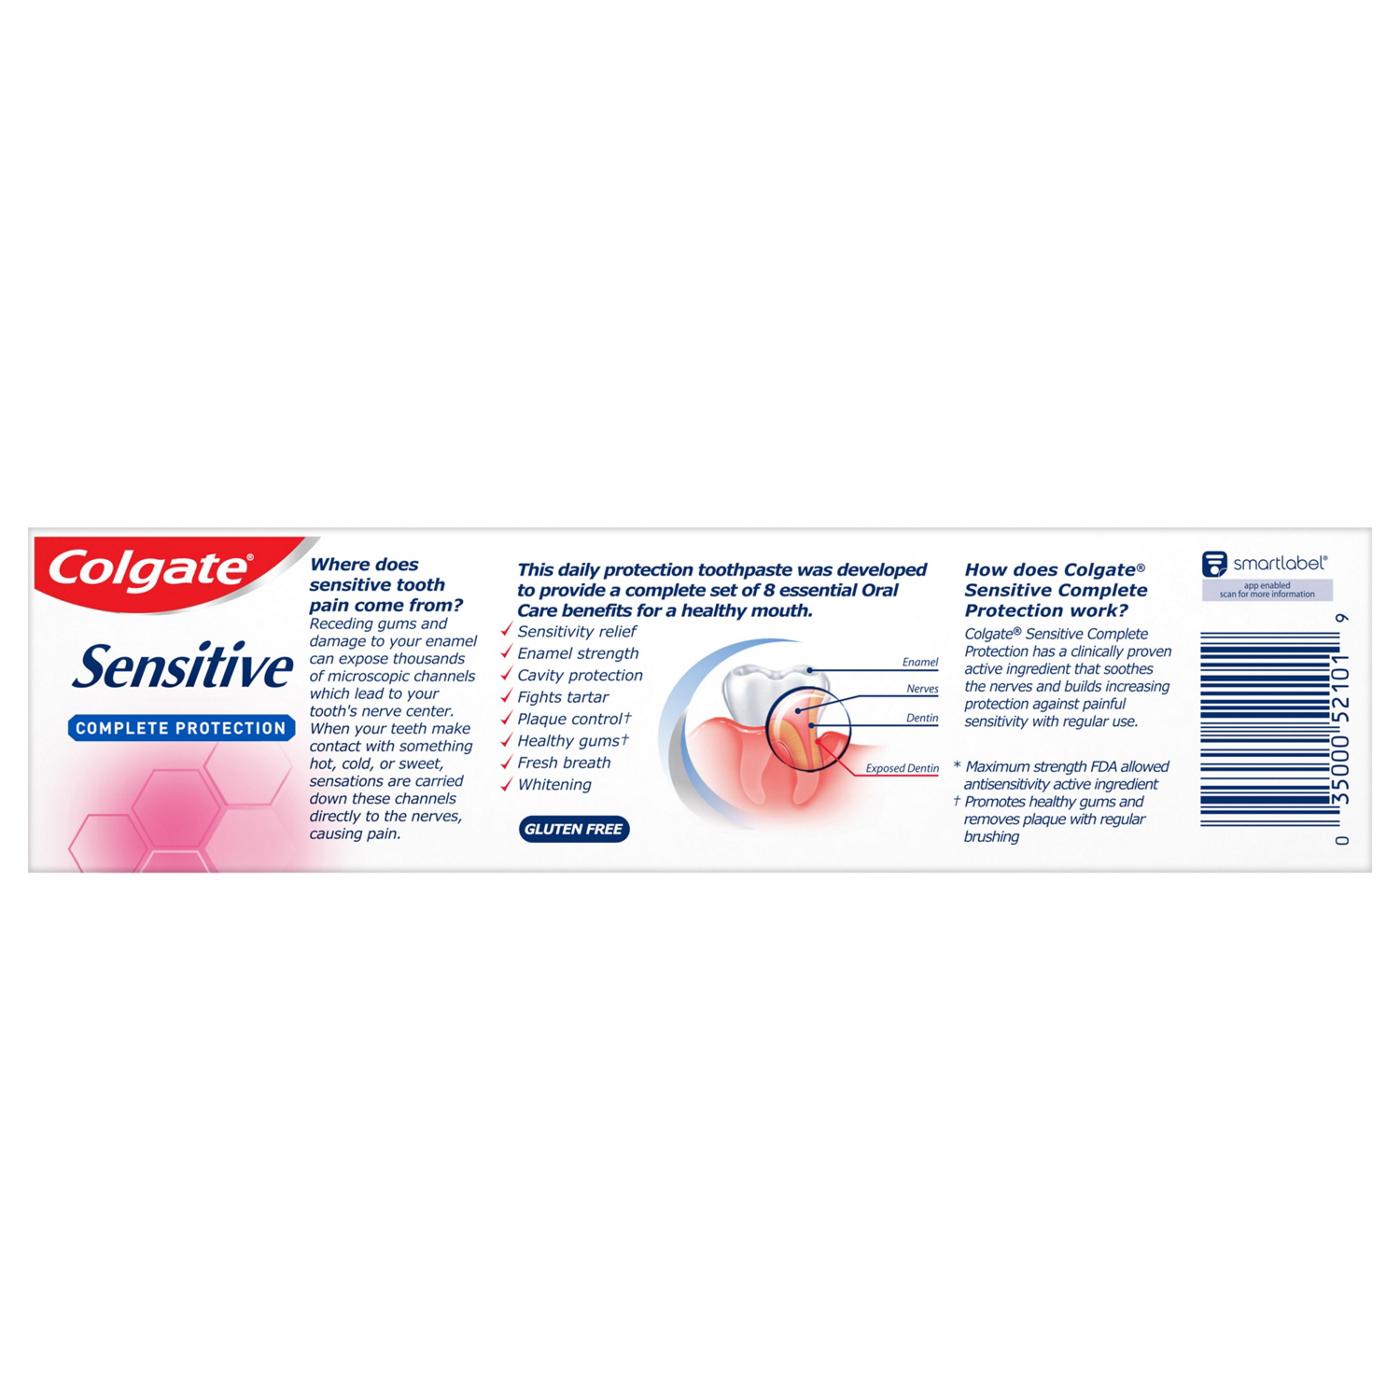 Colgate Sensitive Complete Protection Anticavity Toothpaste - Mint Clean; image 3 of 3